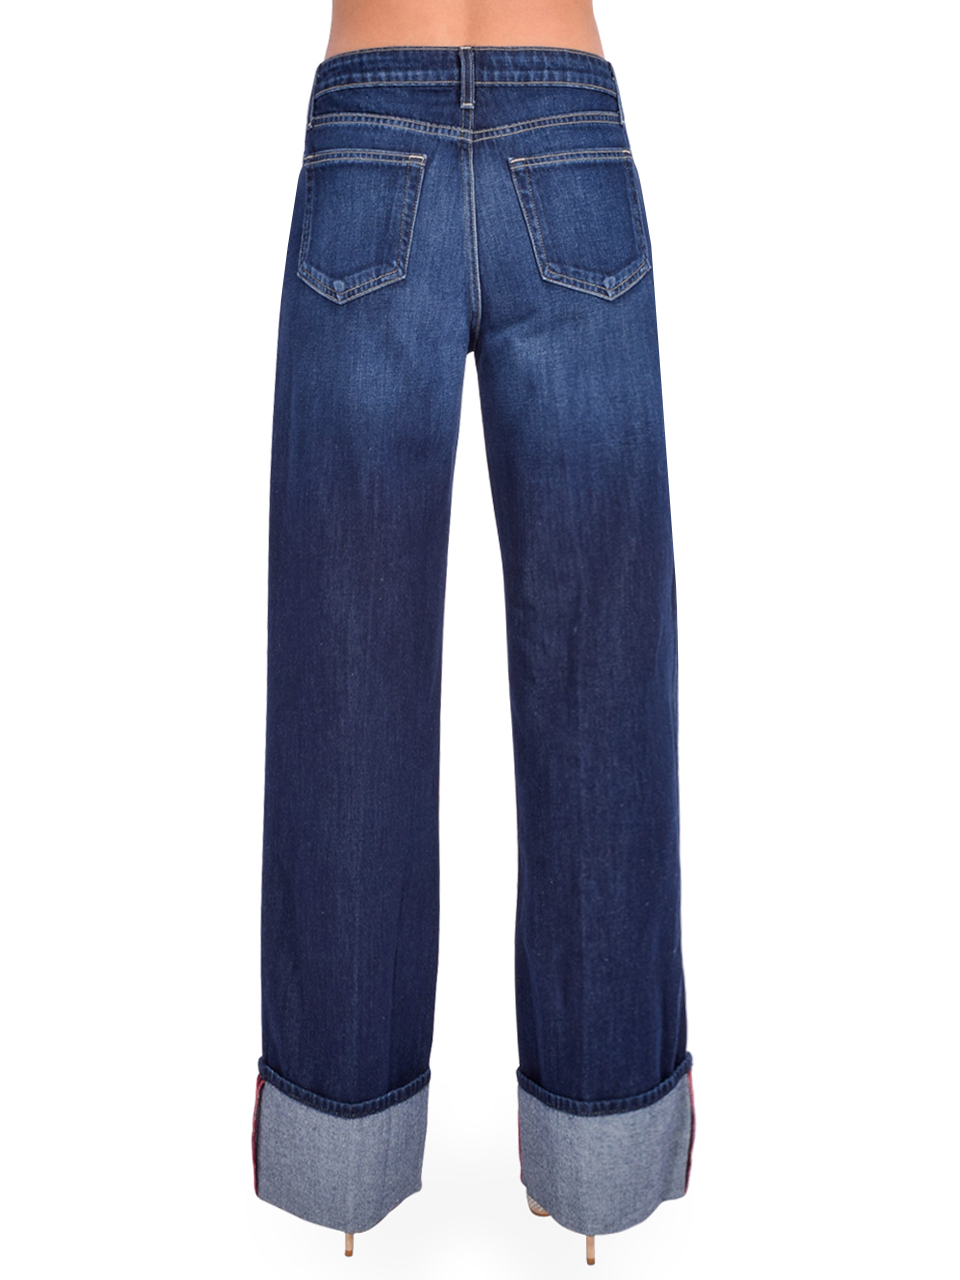 L'AGENCE Miley High Rise Wide Leg Cuff Jean in Denmark Blue Back View 